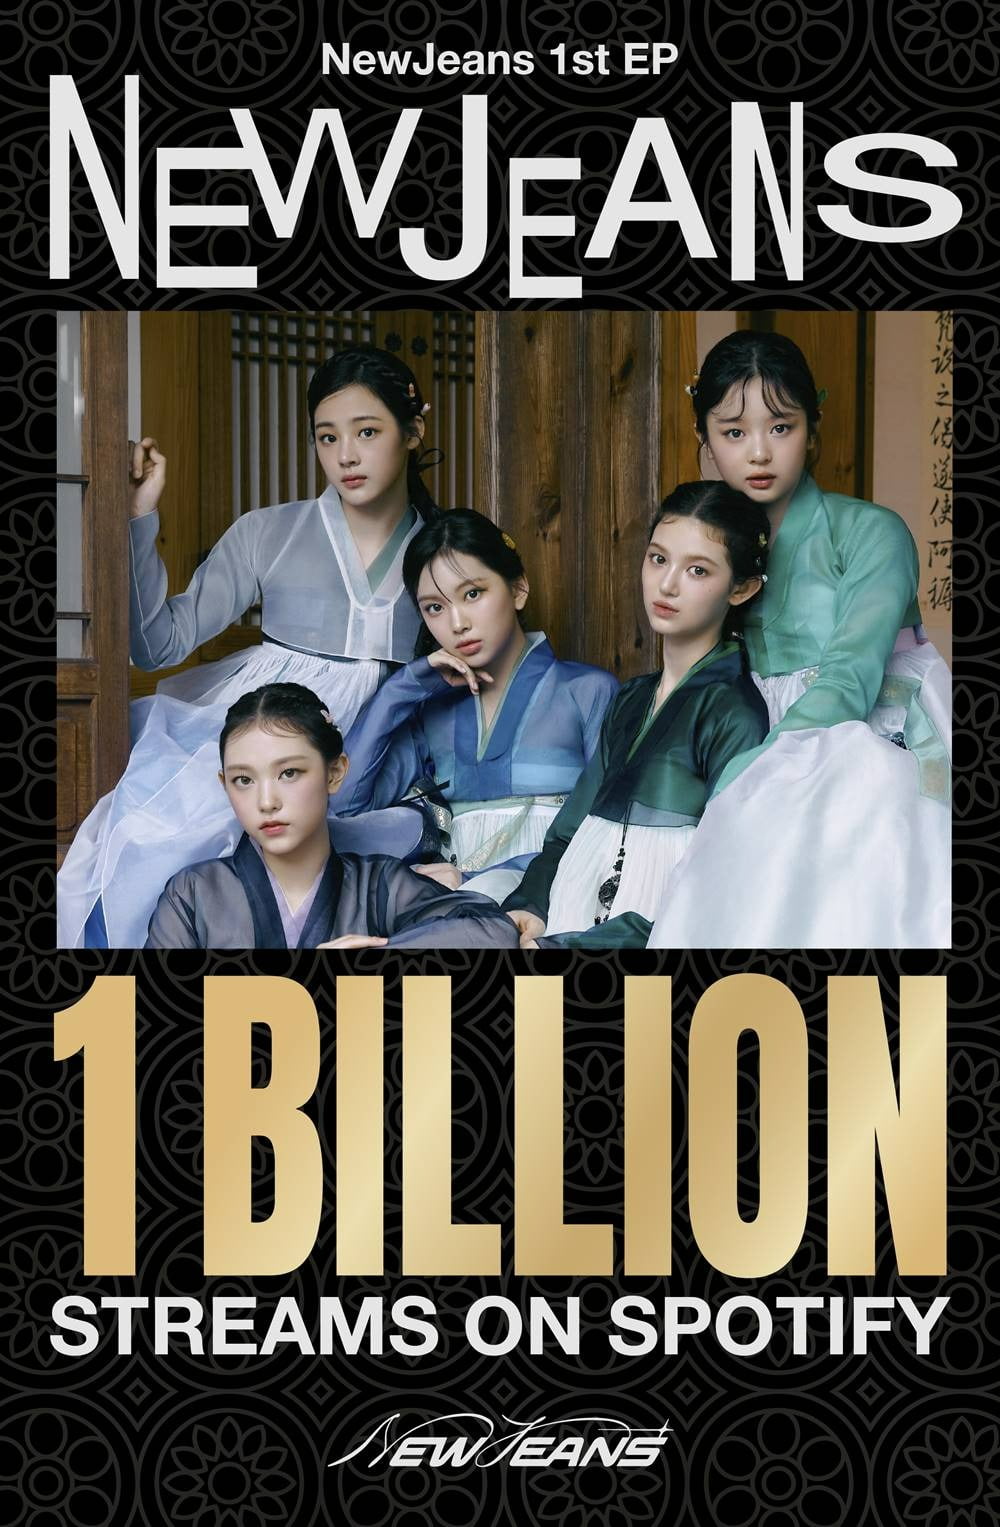 NewJeans, single album played on Spotify exceeds 1 billion times